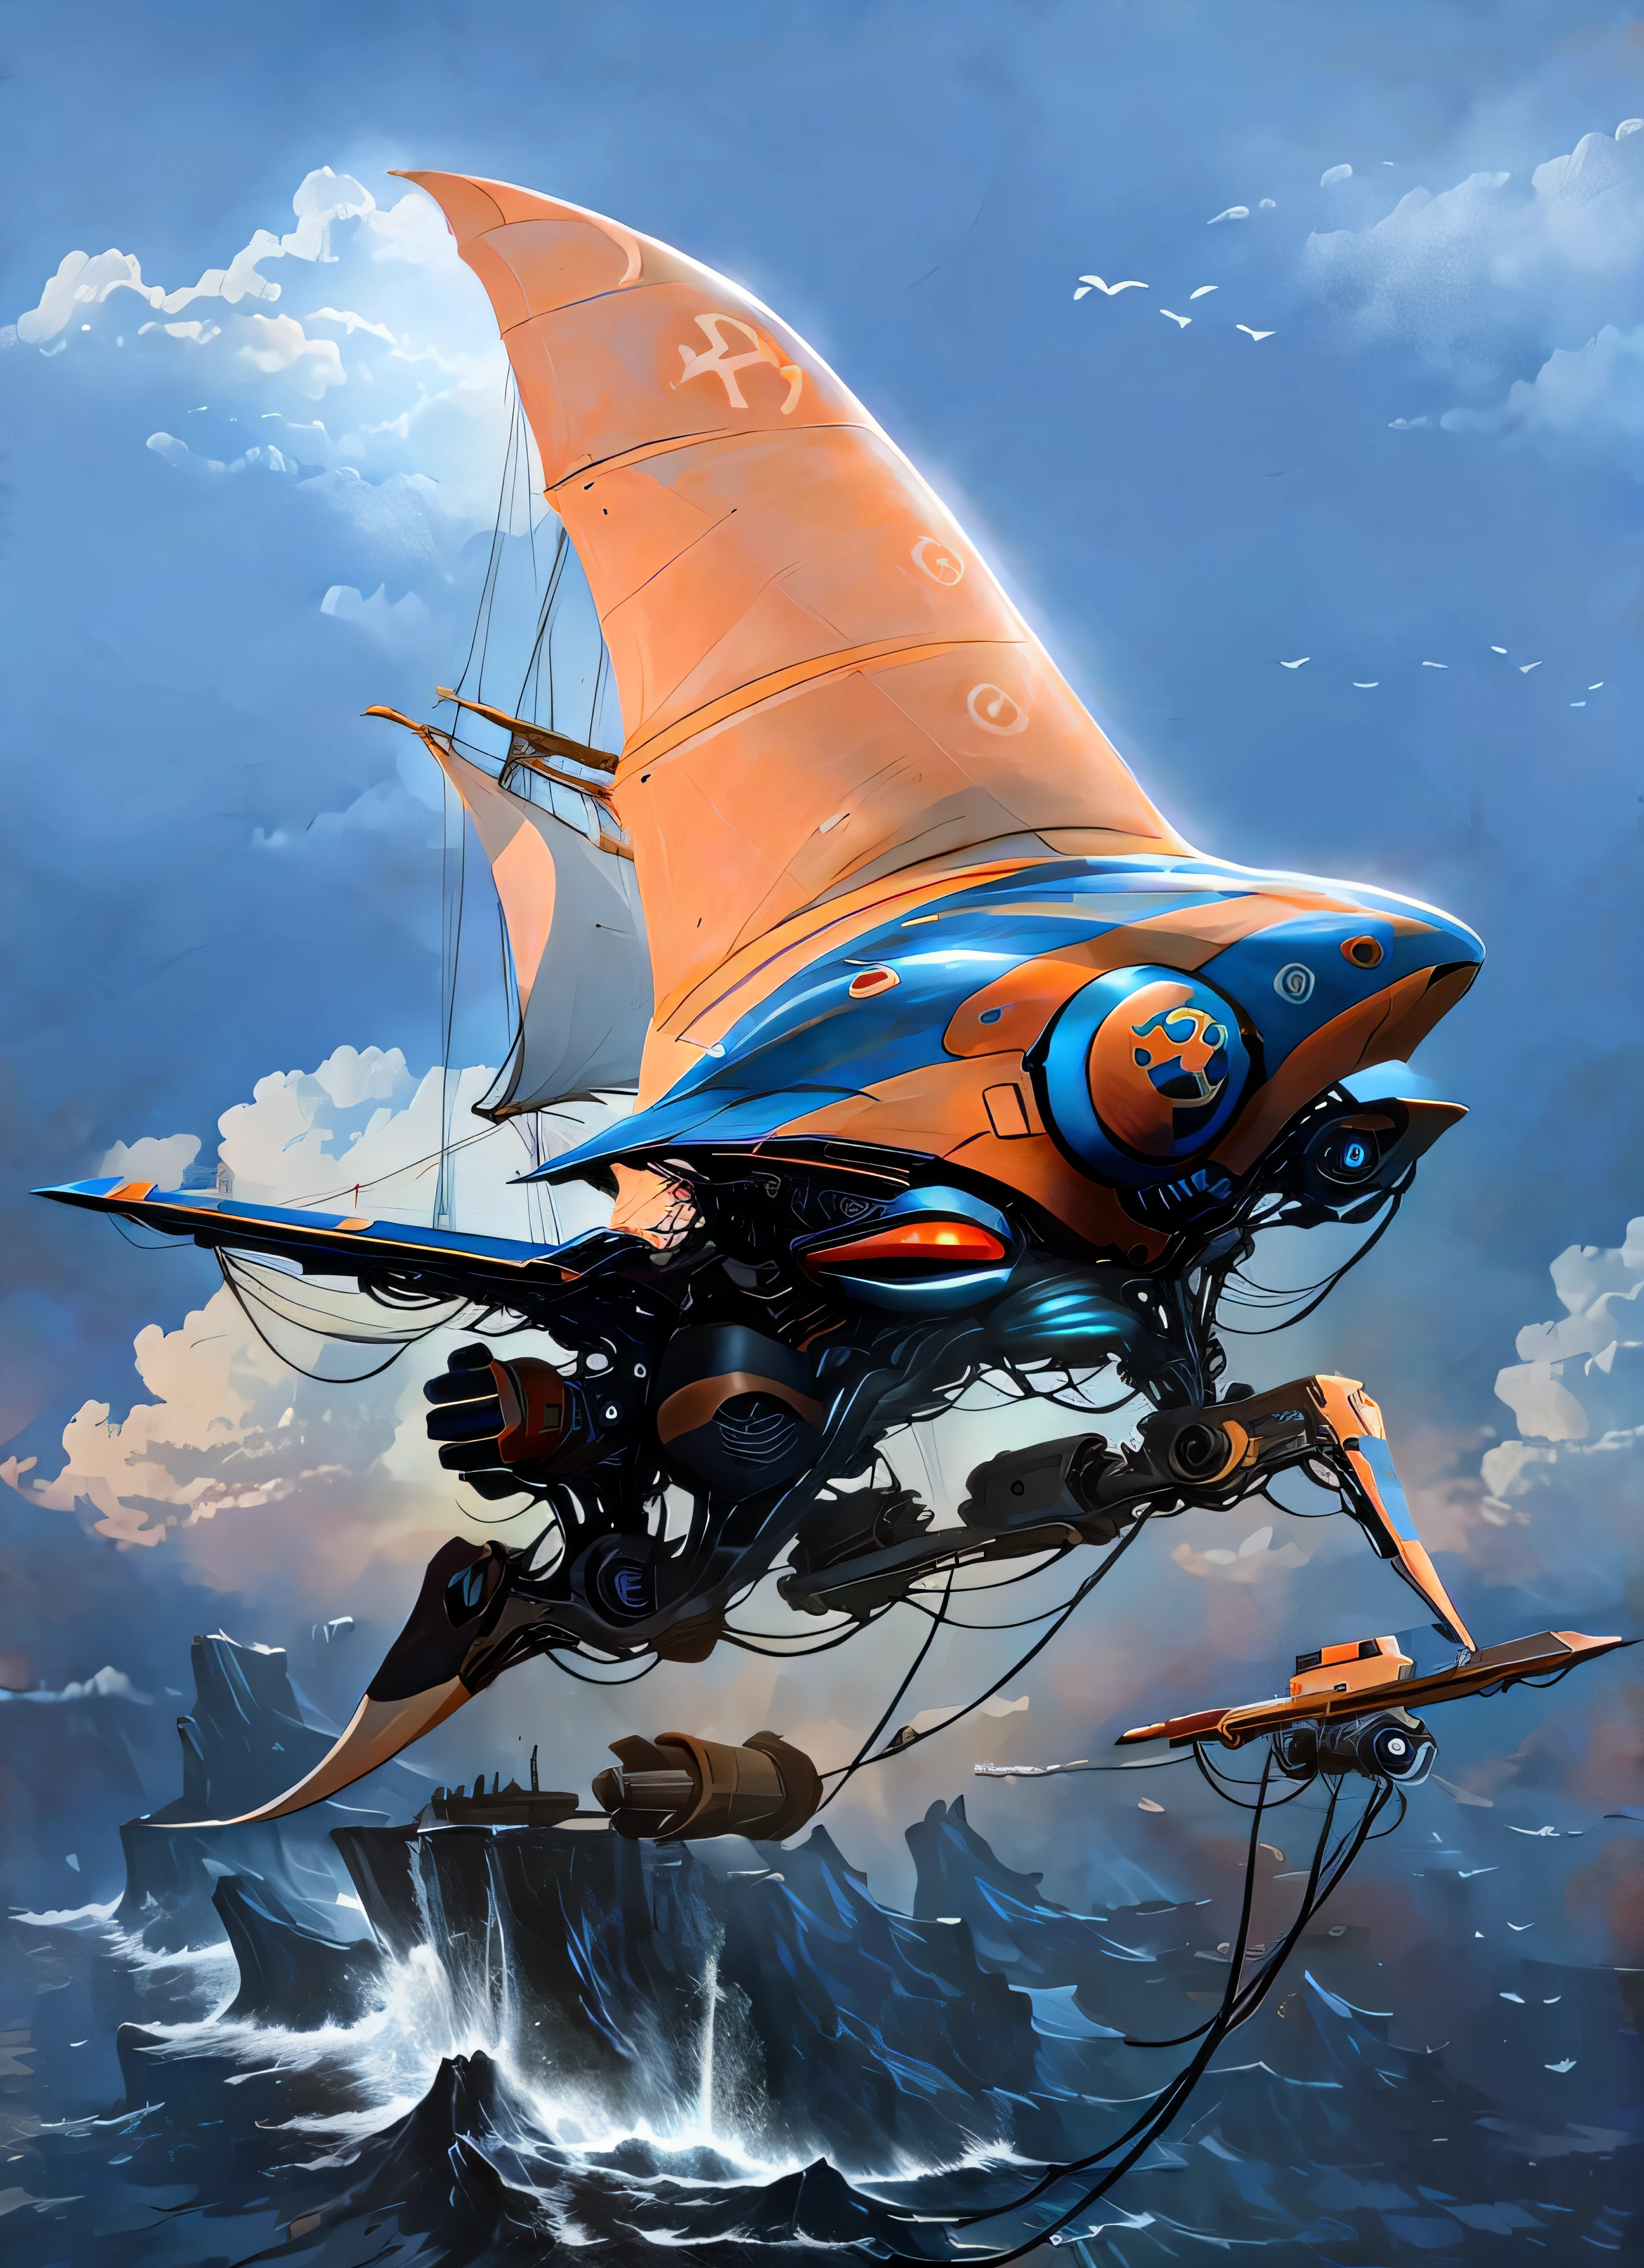 Futuristic super sailing ship flying among the clouds surrounded by seagulls and super sharks swimming in a rough sea with huge threatening waves crashing against cliffs of volcanic islands